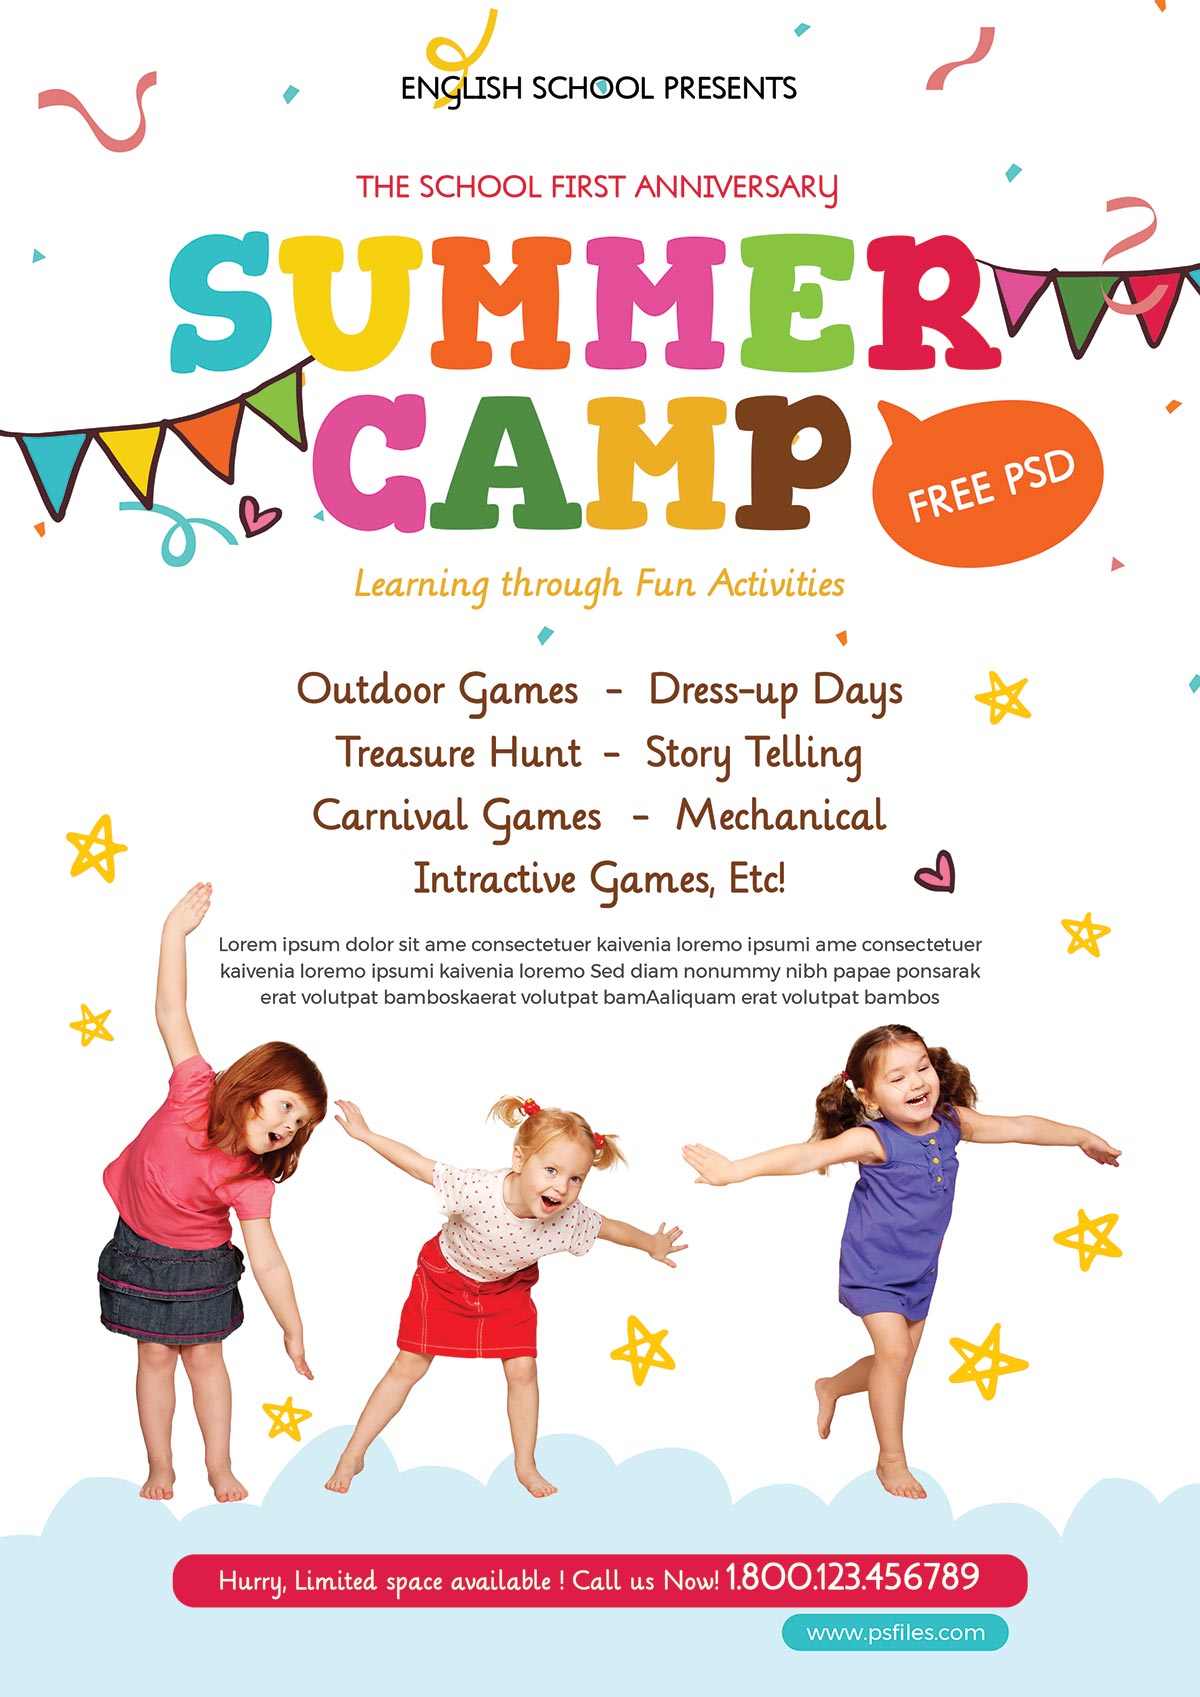 Free Kids Summer Camp PSD Flyer for Pre Schools PsFiles